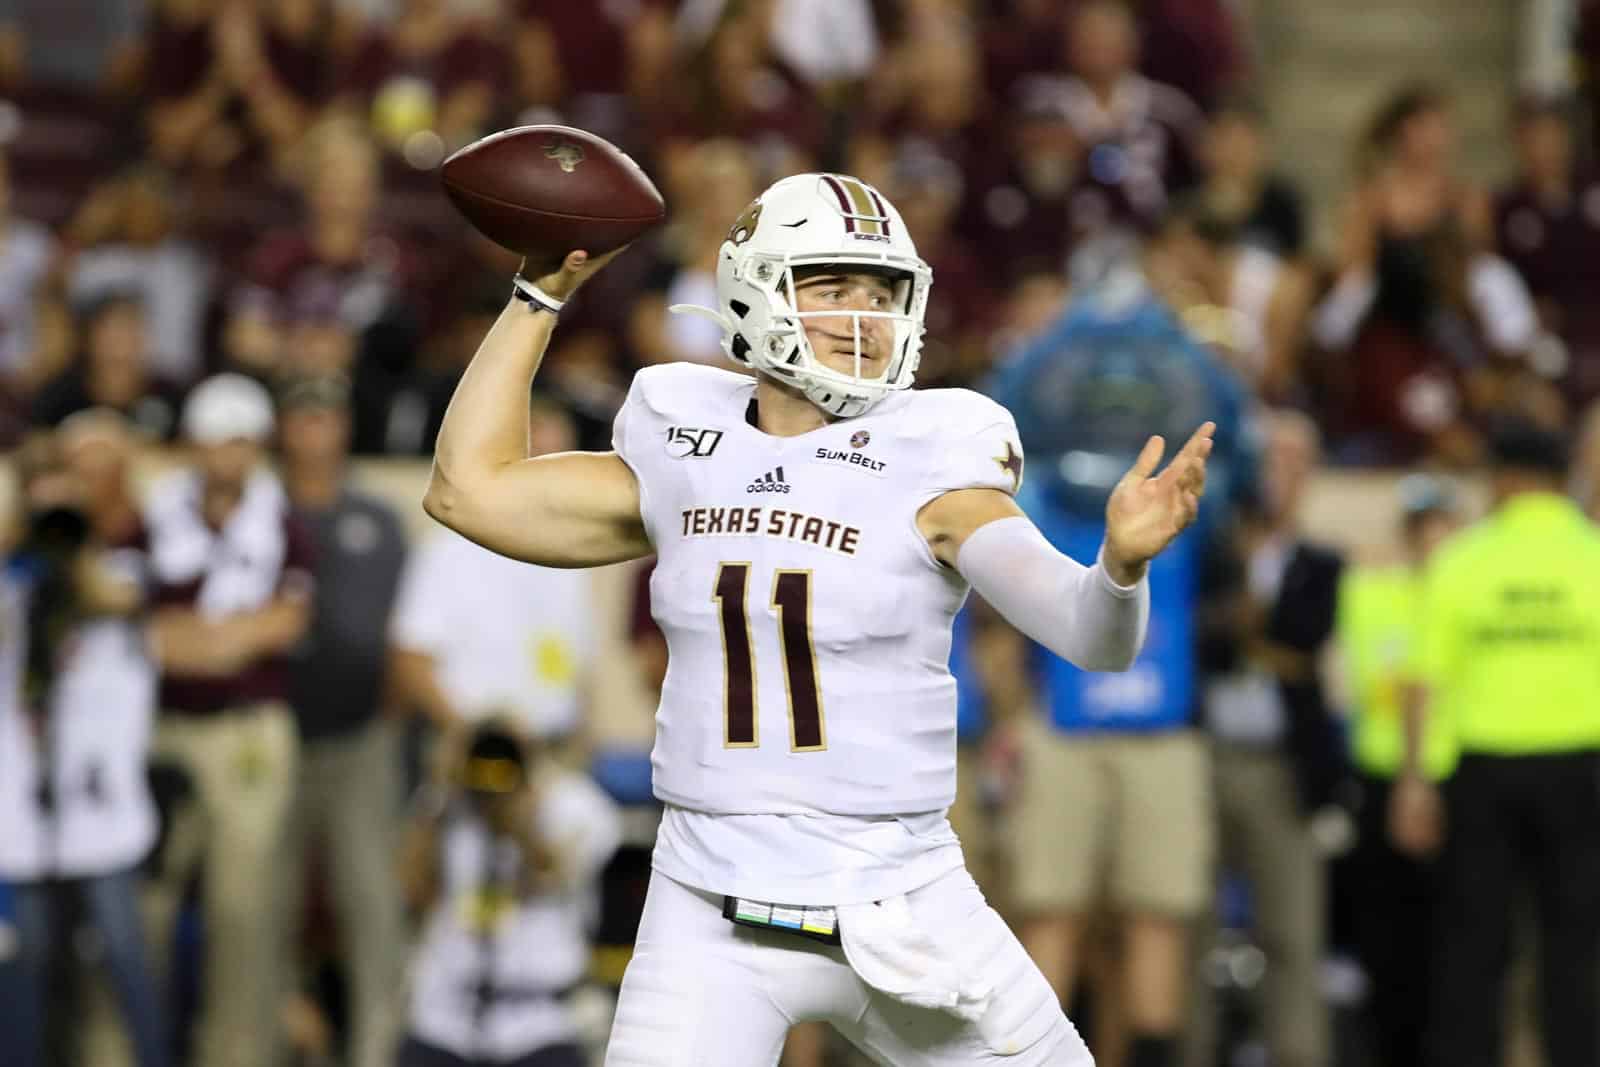 Texas State adds Incarnate Word to 2021 football schedule